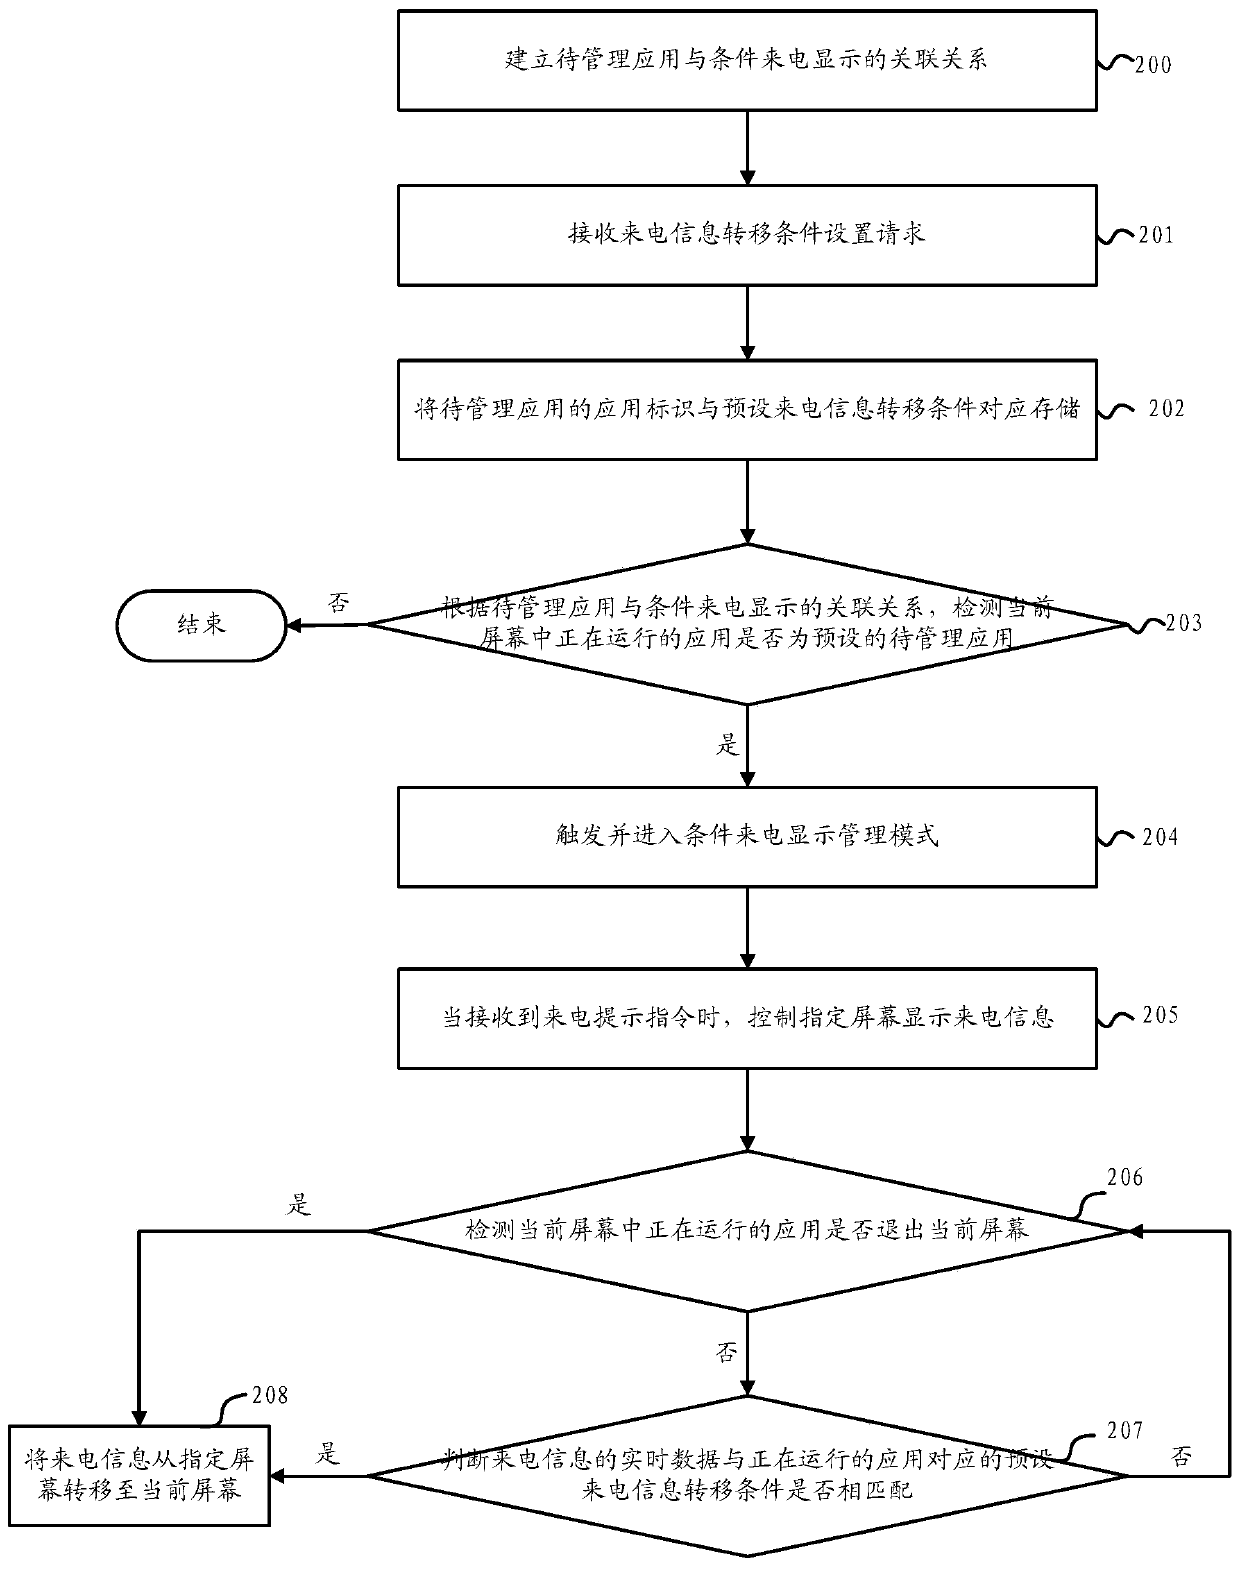 Method and device for managing incoming call information